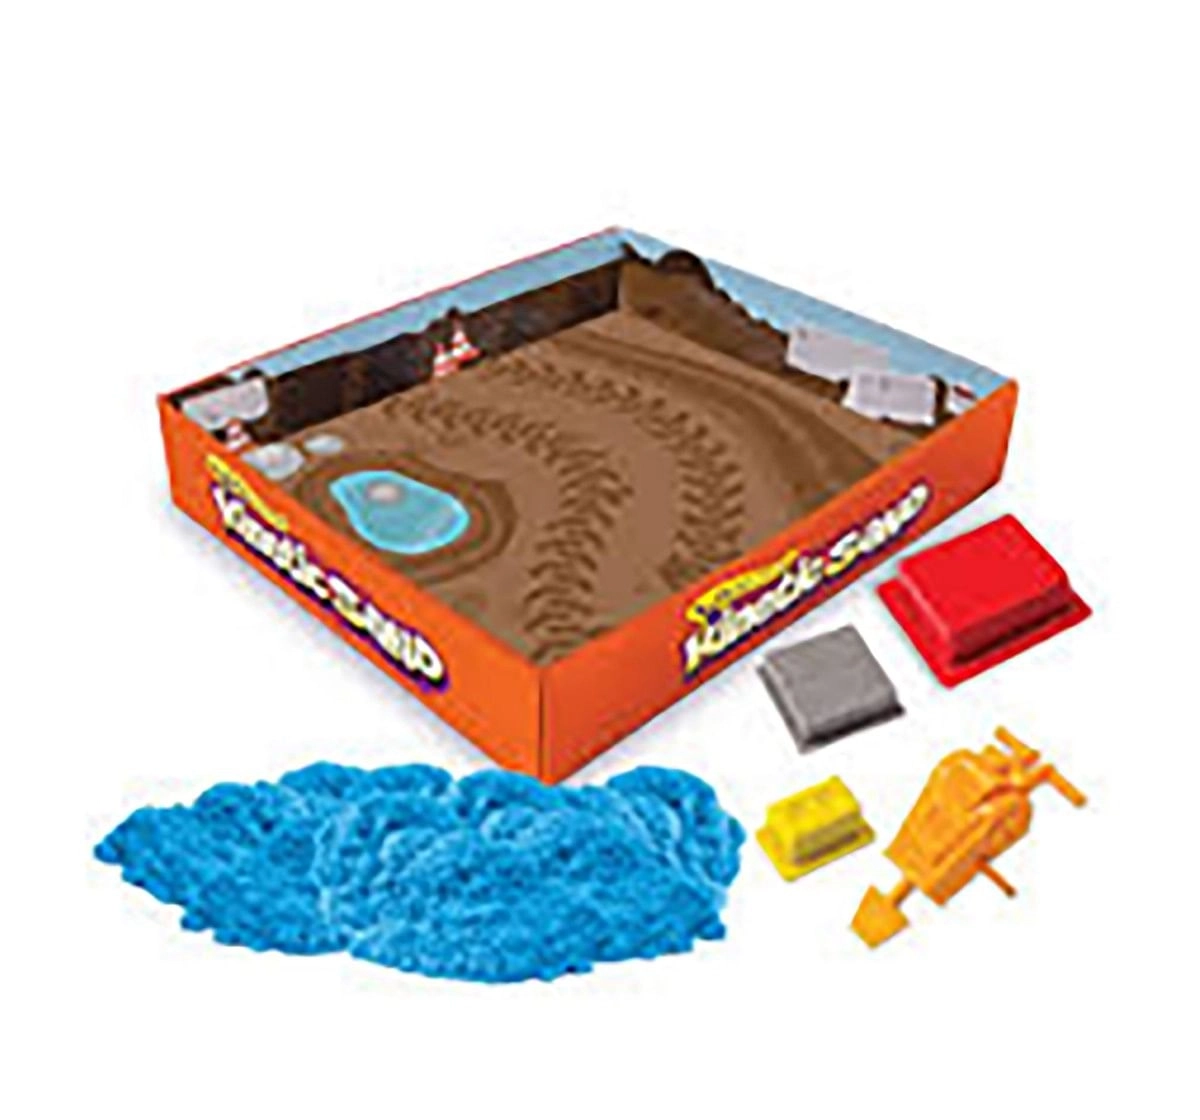 Kinetic Sand Construction Zone Playset Sand, Slime & Others for Kids age 3Y+ 